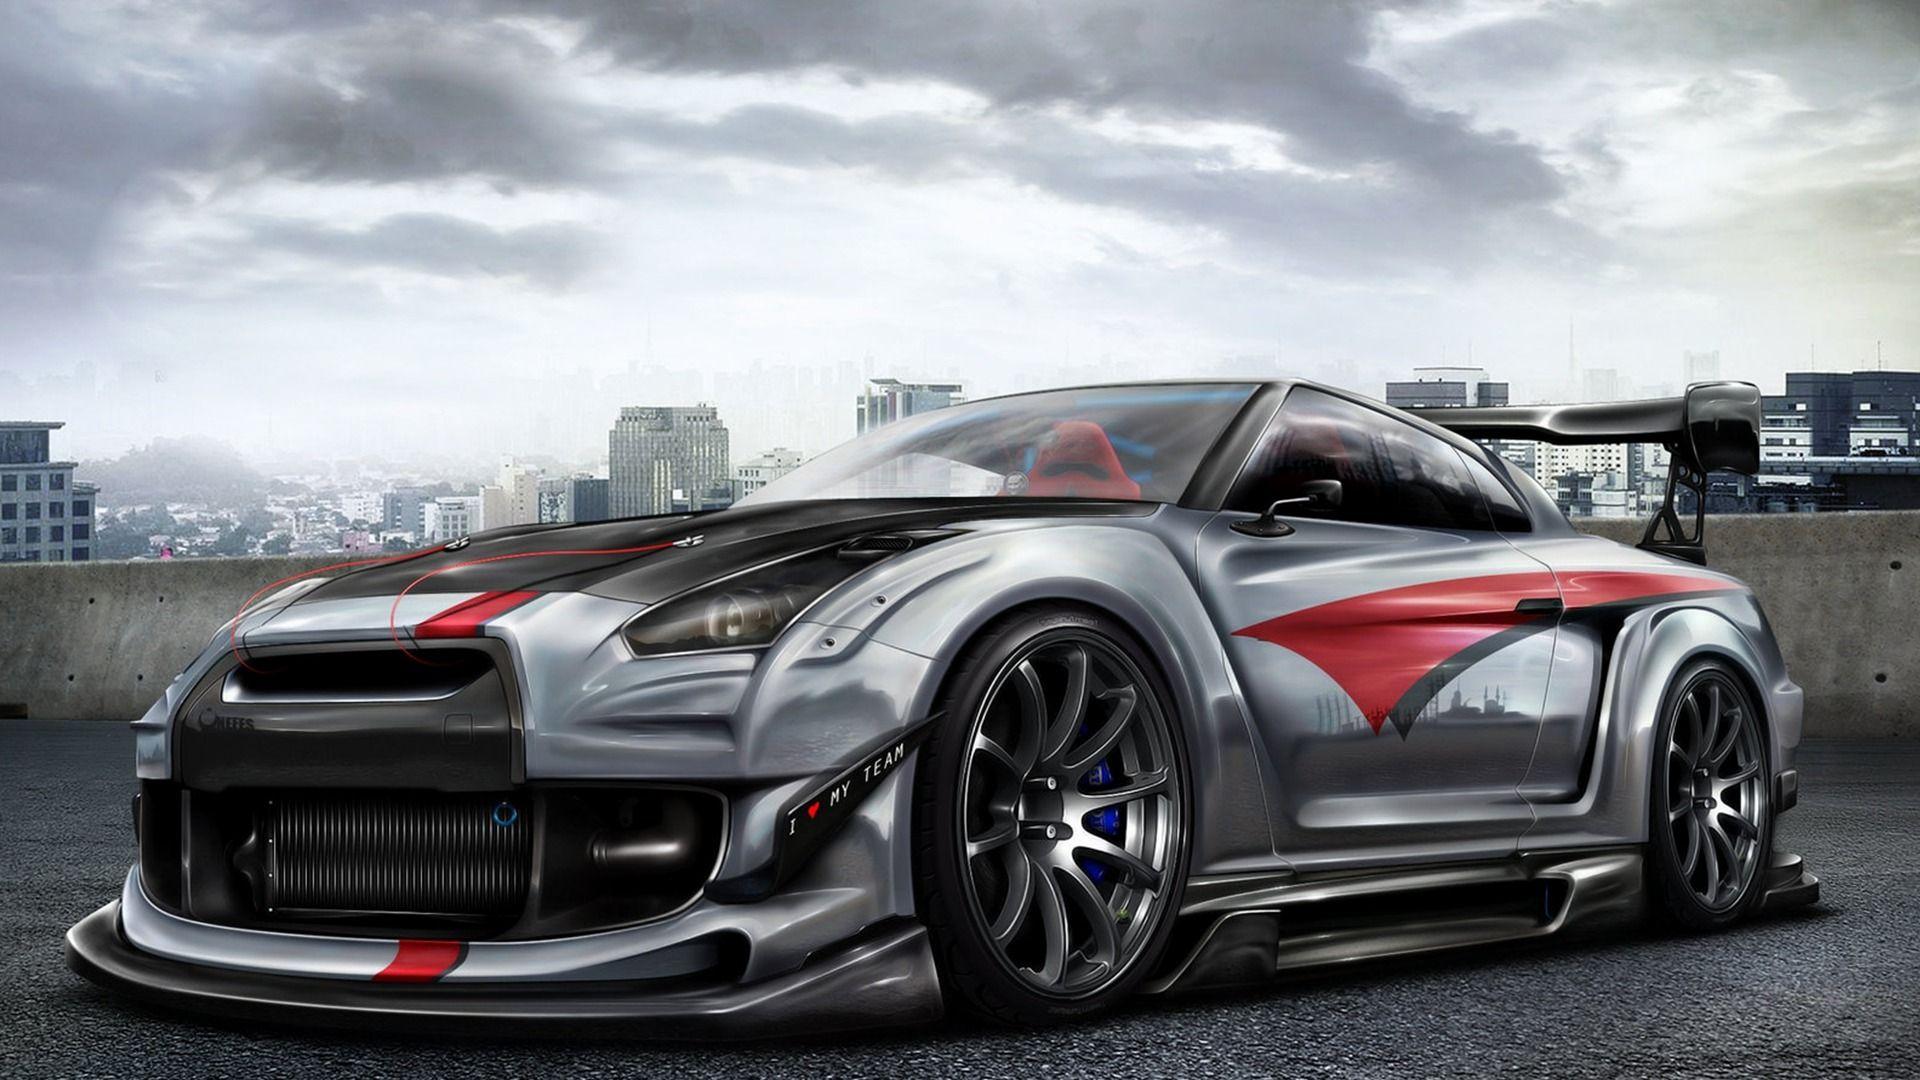 Nissan GT R Racing Car Need For Speed HD Wallpaper